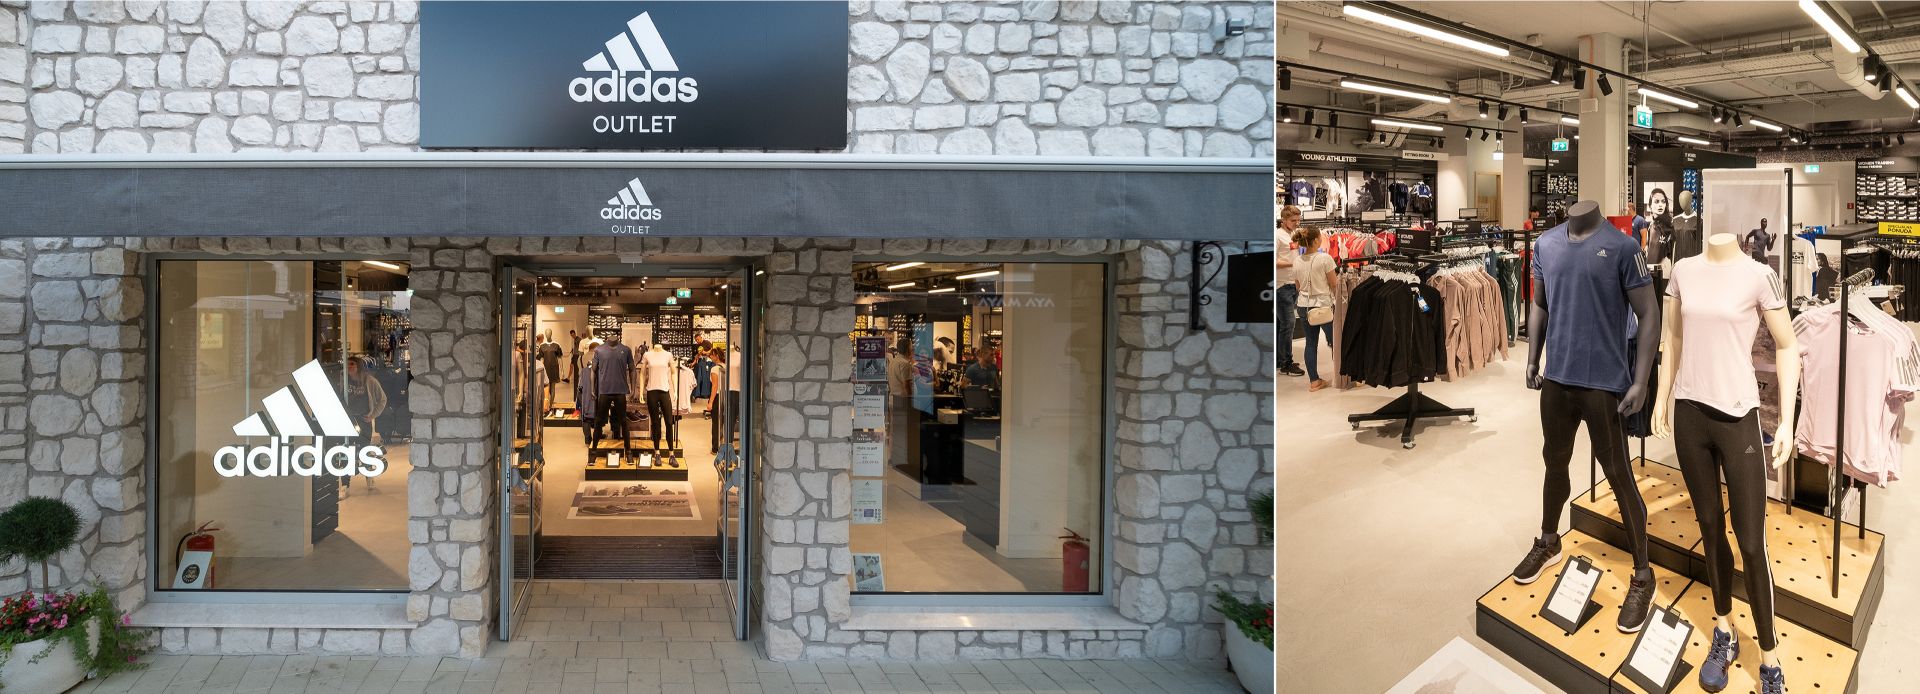 outlet adidas zagreb